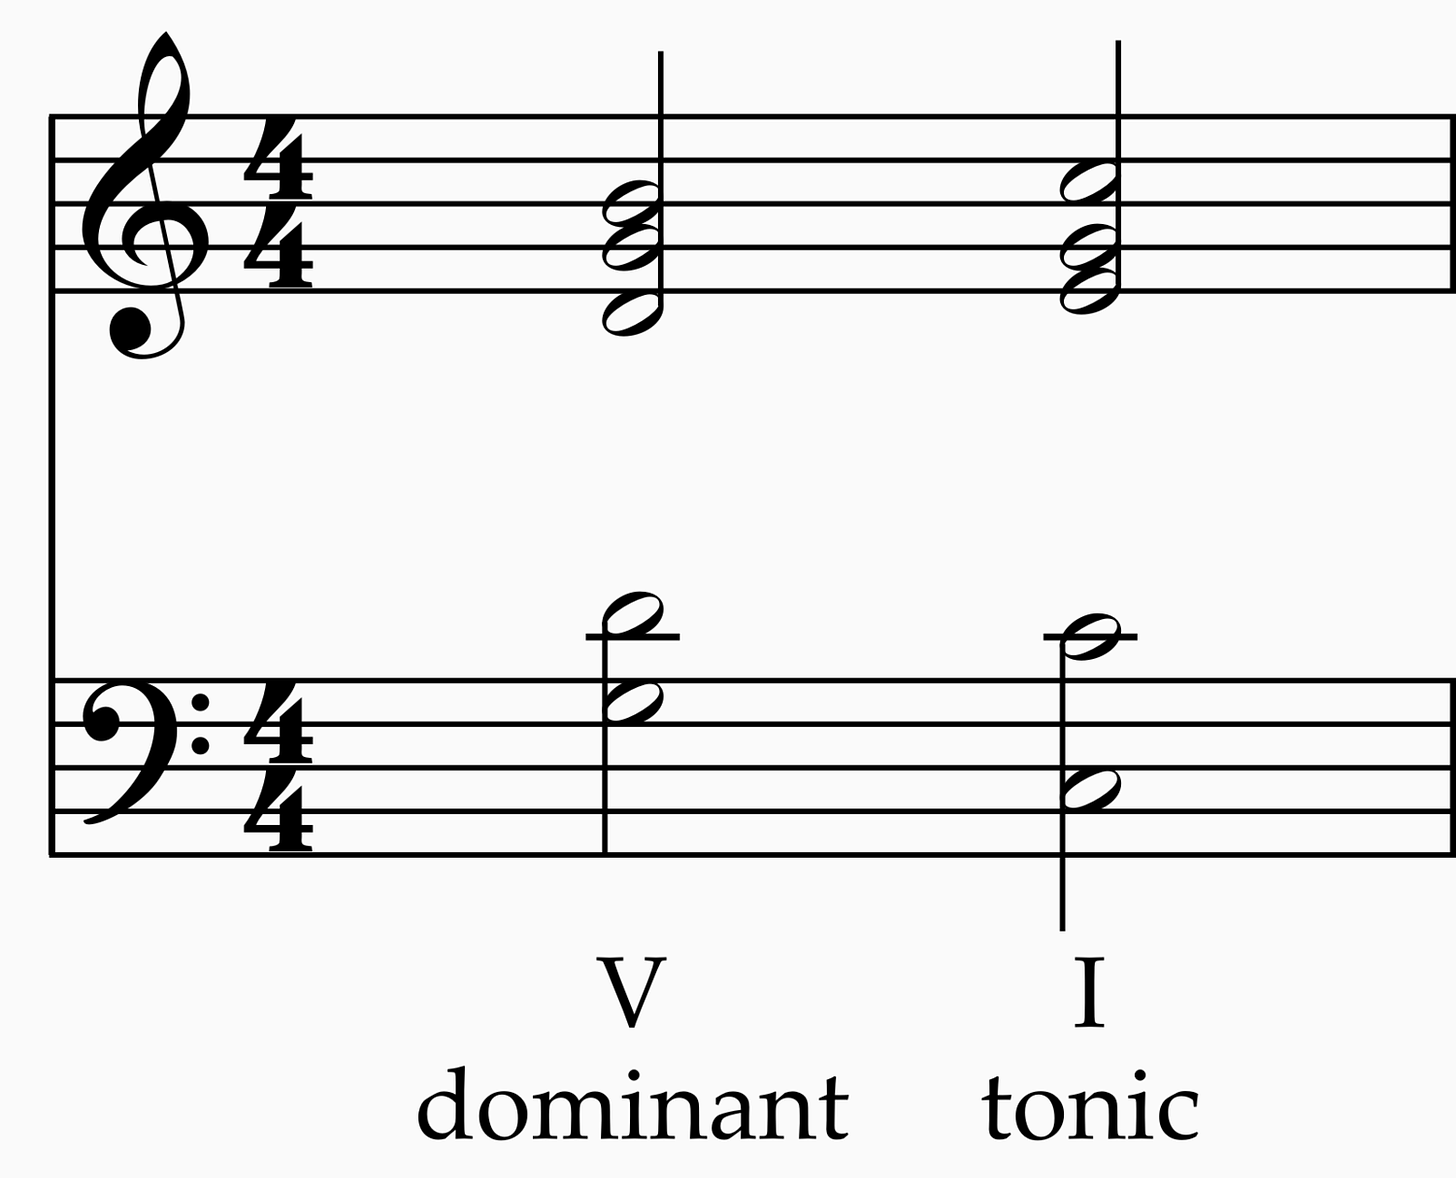 Figure 12. Dominant -&gt; Tonic. The dominant chord prepares the ear for the tonic.